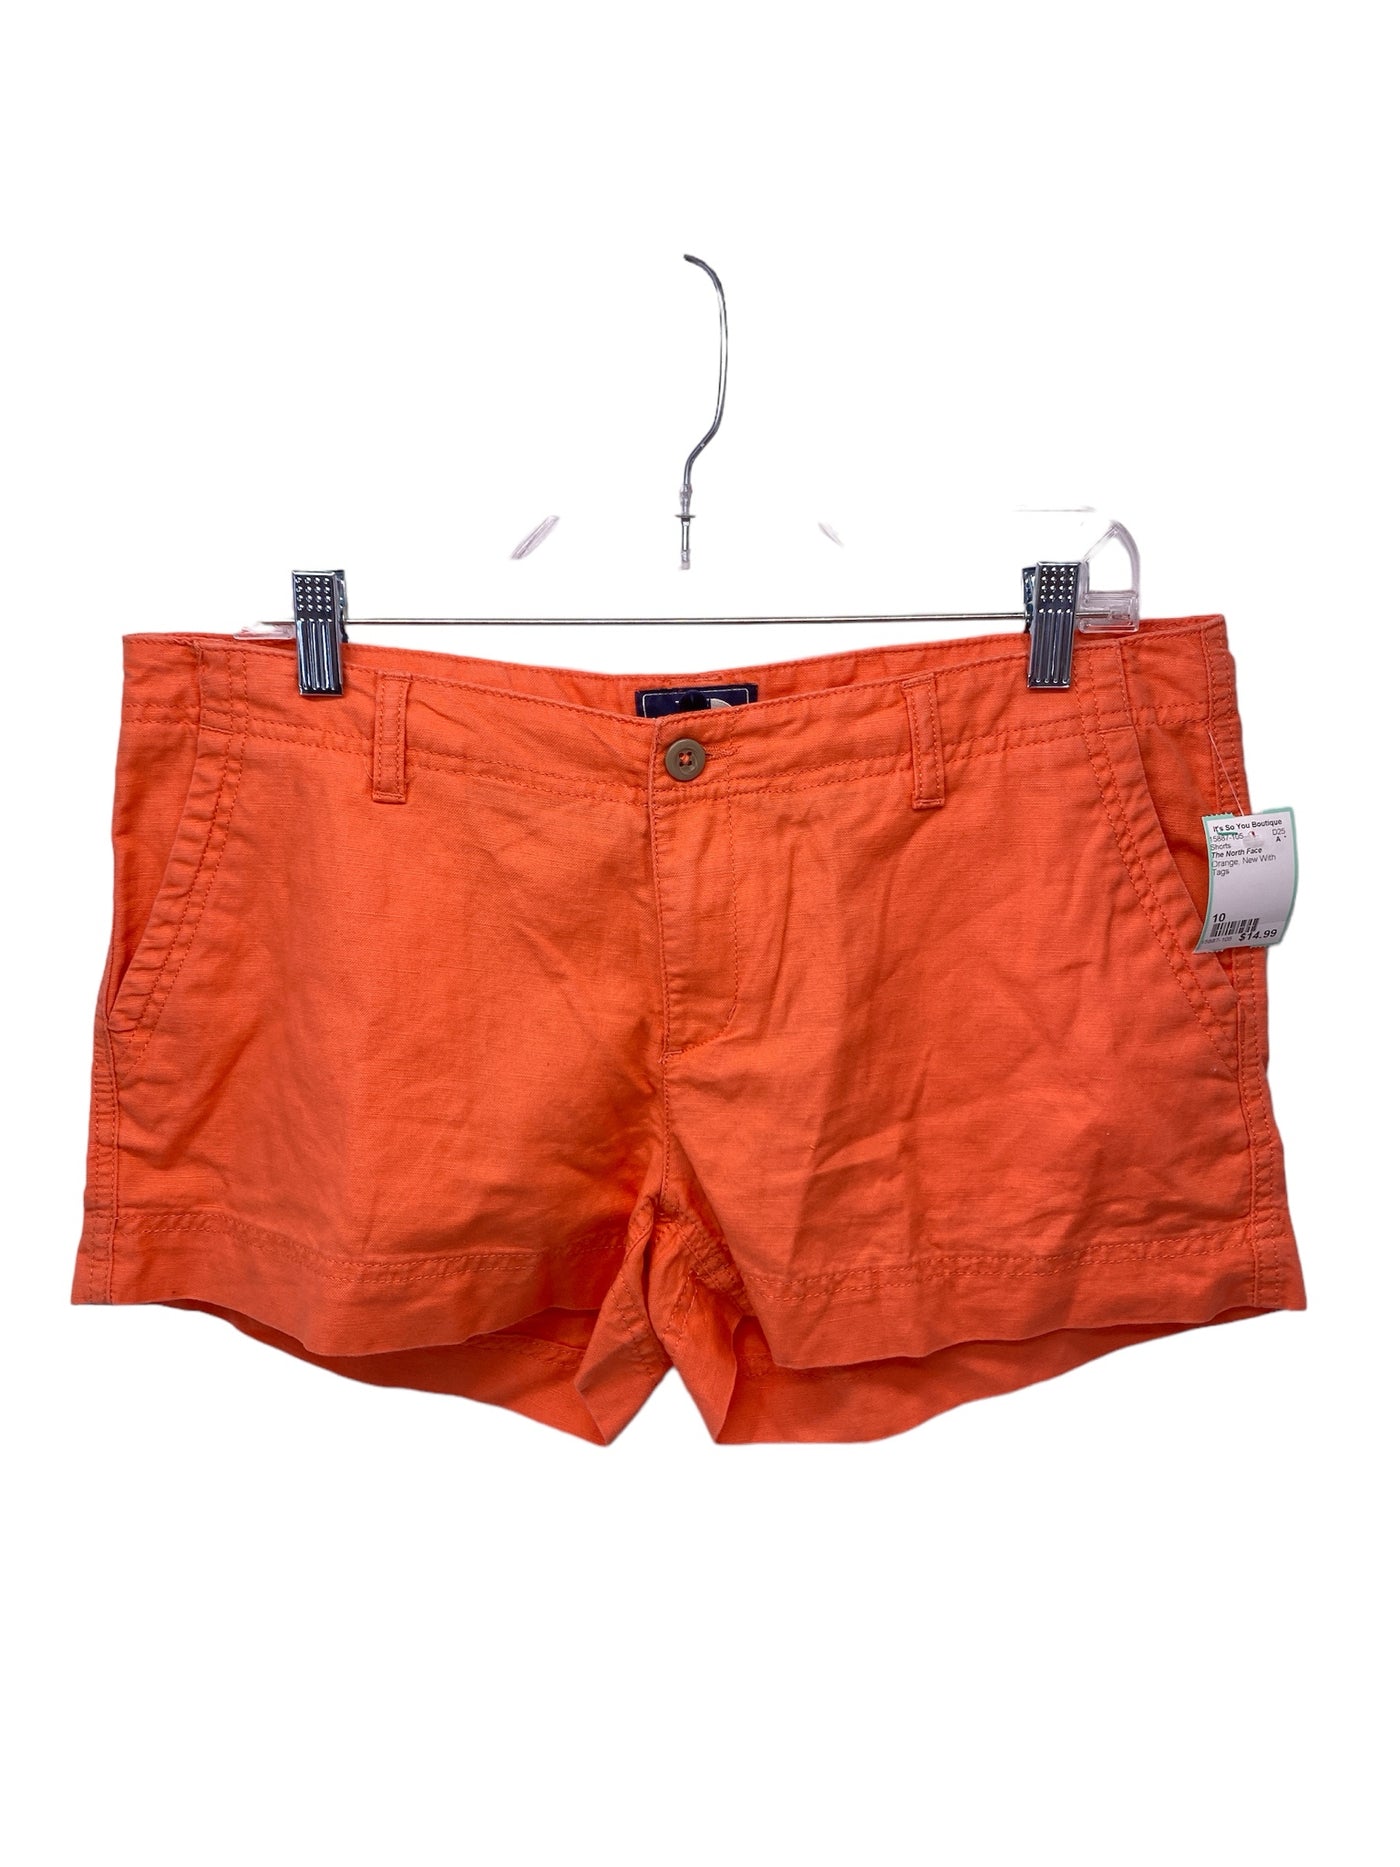 The North Face Misses Size 10 Orange New With Tags Shorts